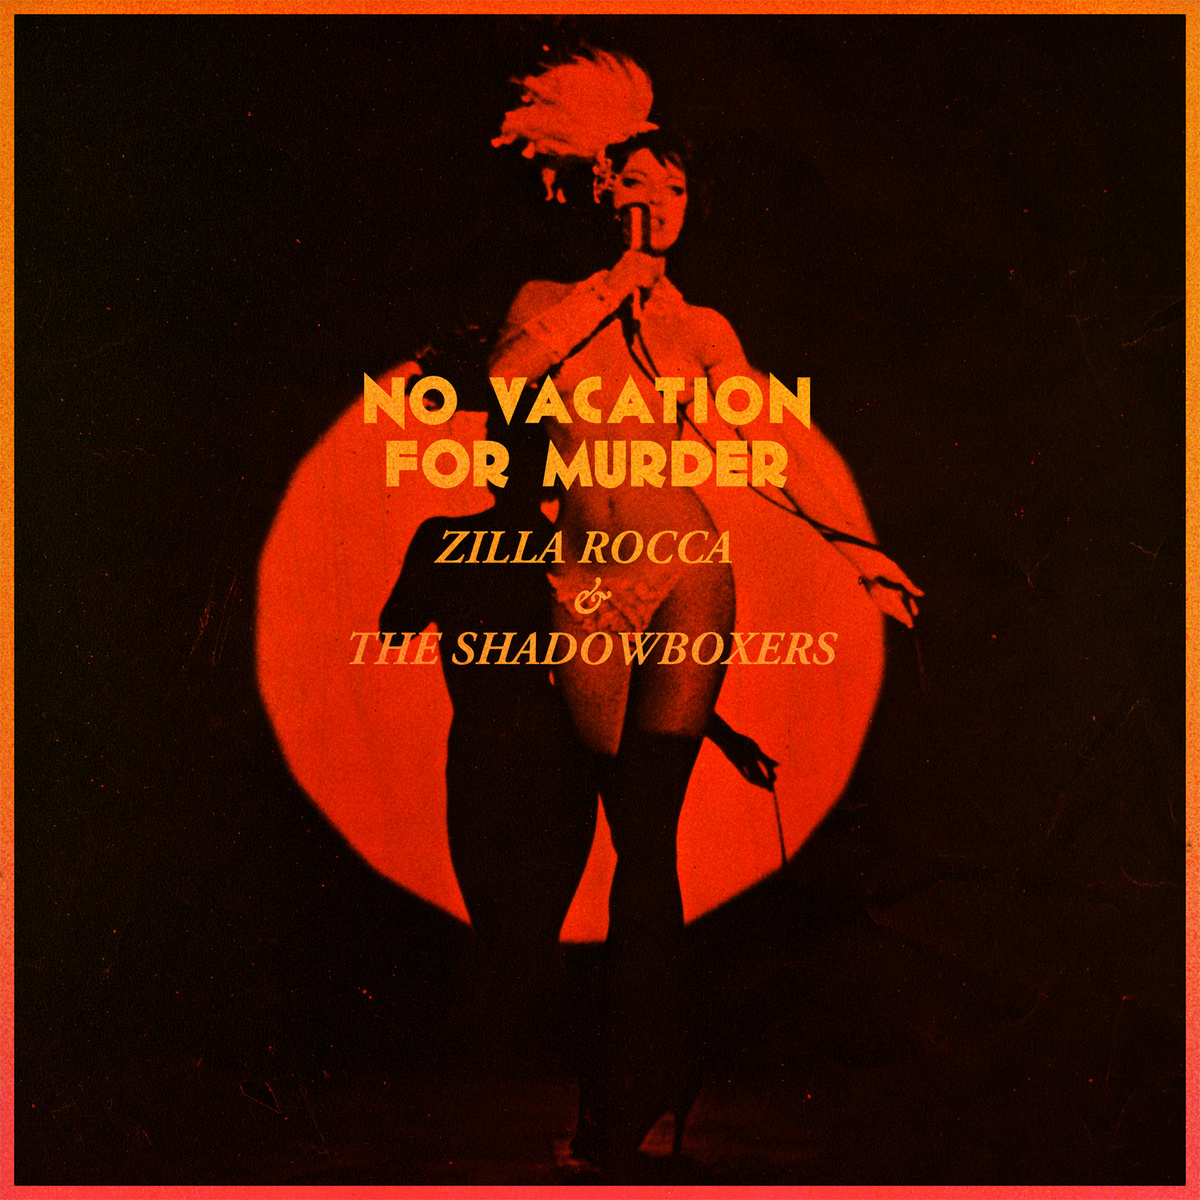 Zilla Rocha & The Shadowboxers - "No Vacation for Murder" (Release)